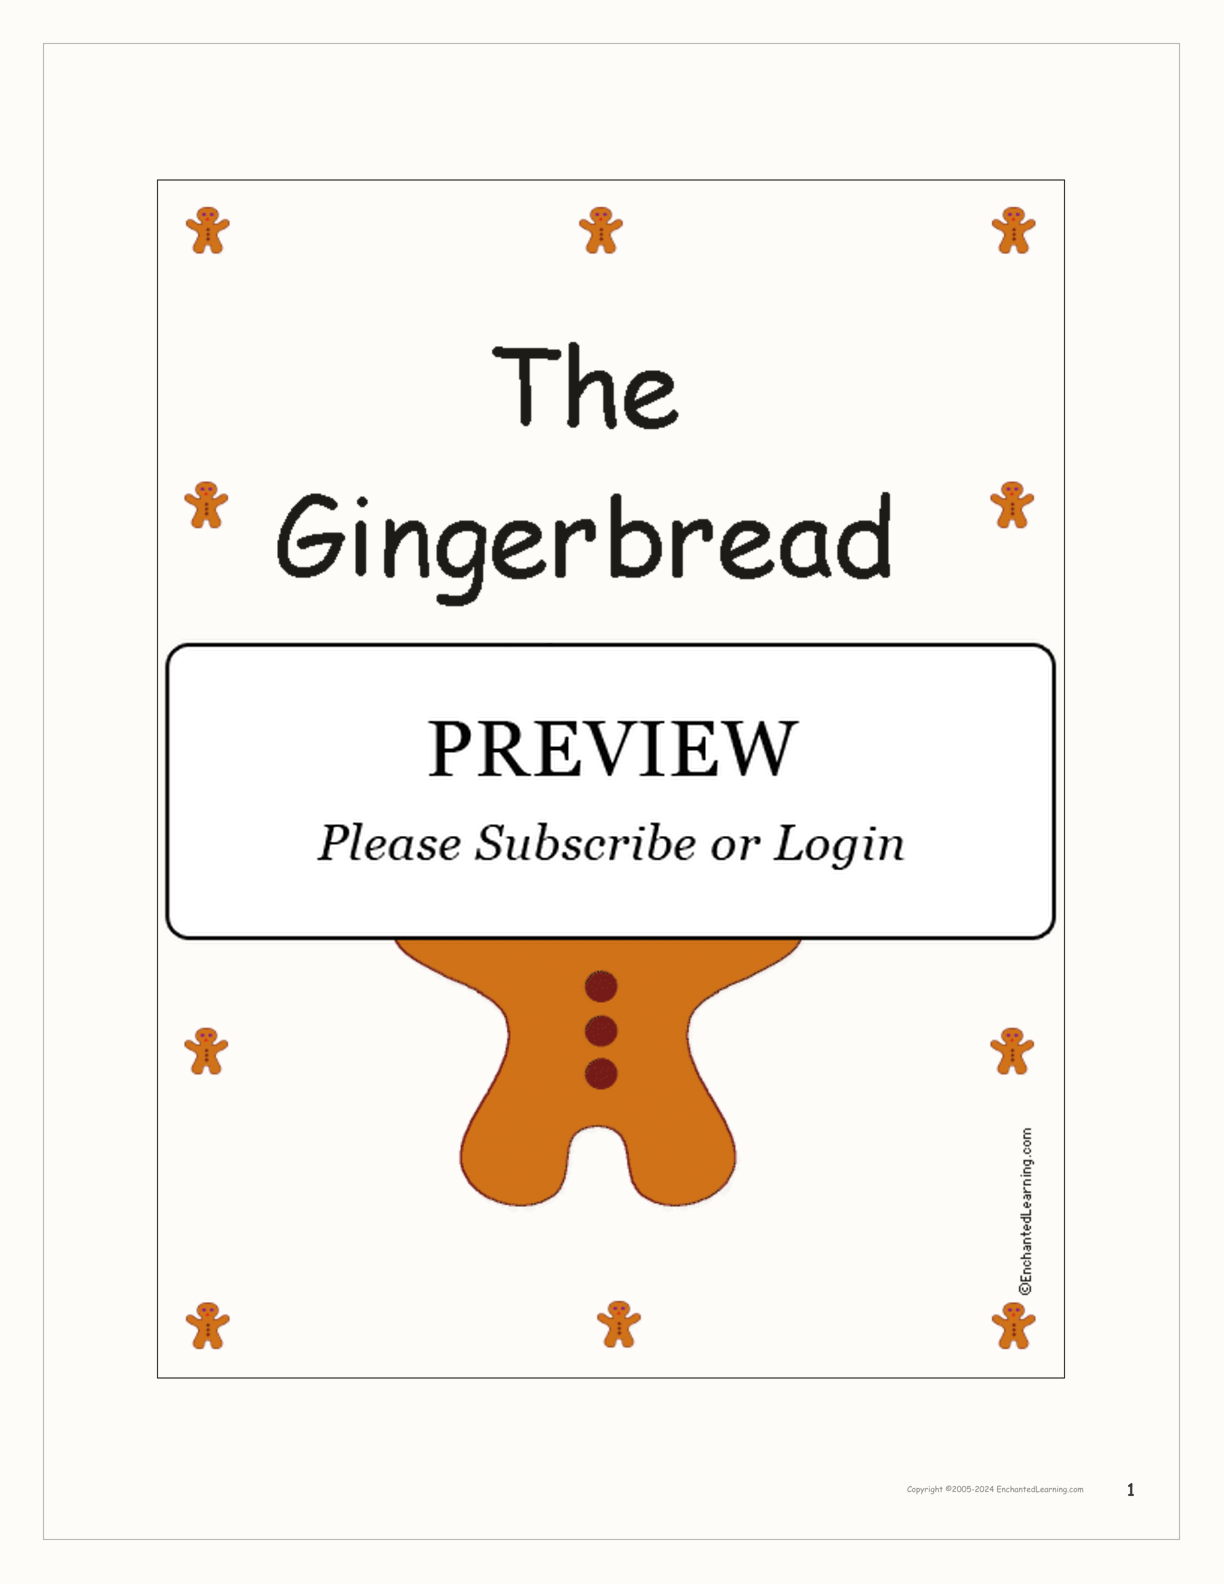 'The Gingerbread Man' Book interactive printout page 1